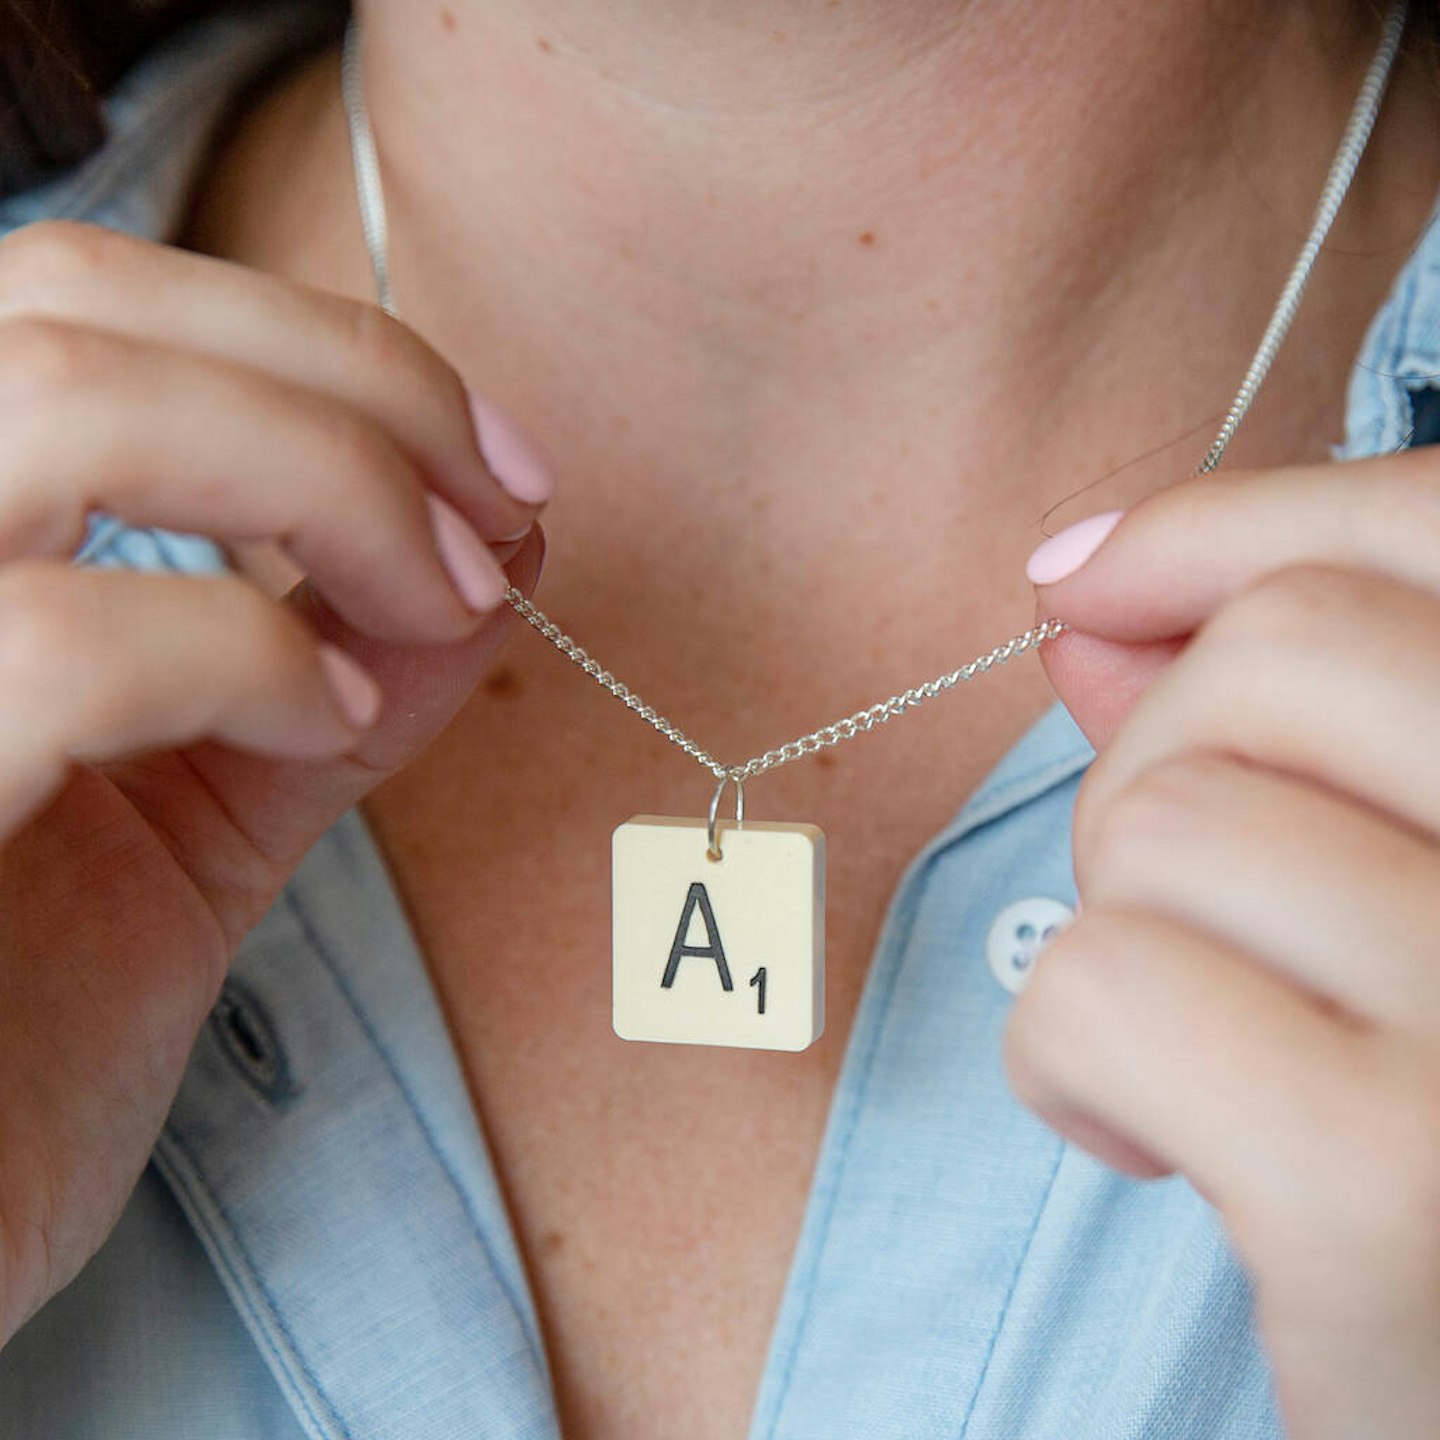 Vintage Letter Tile Personalised Necklace worn around neck. The letter A